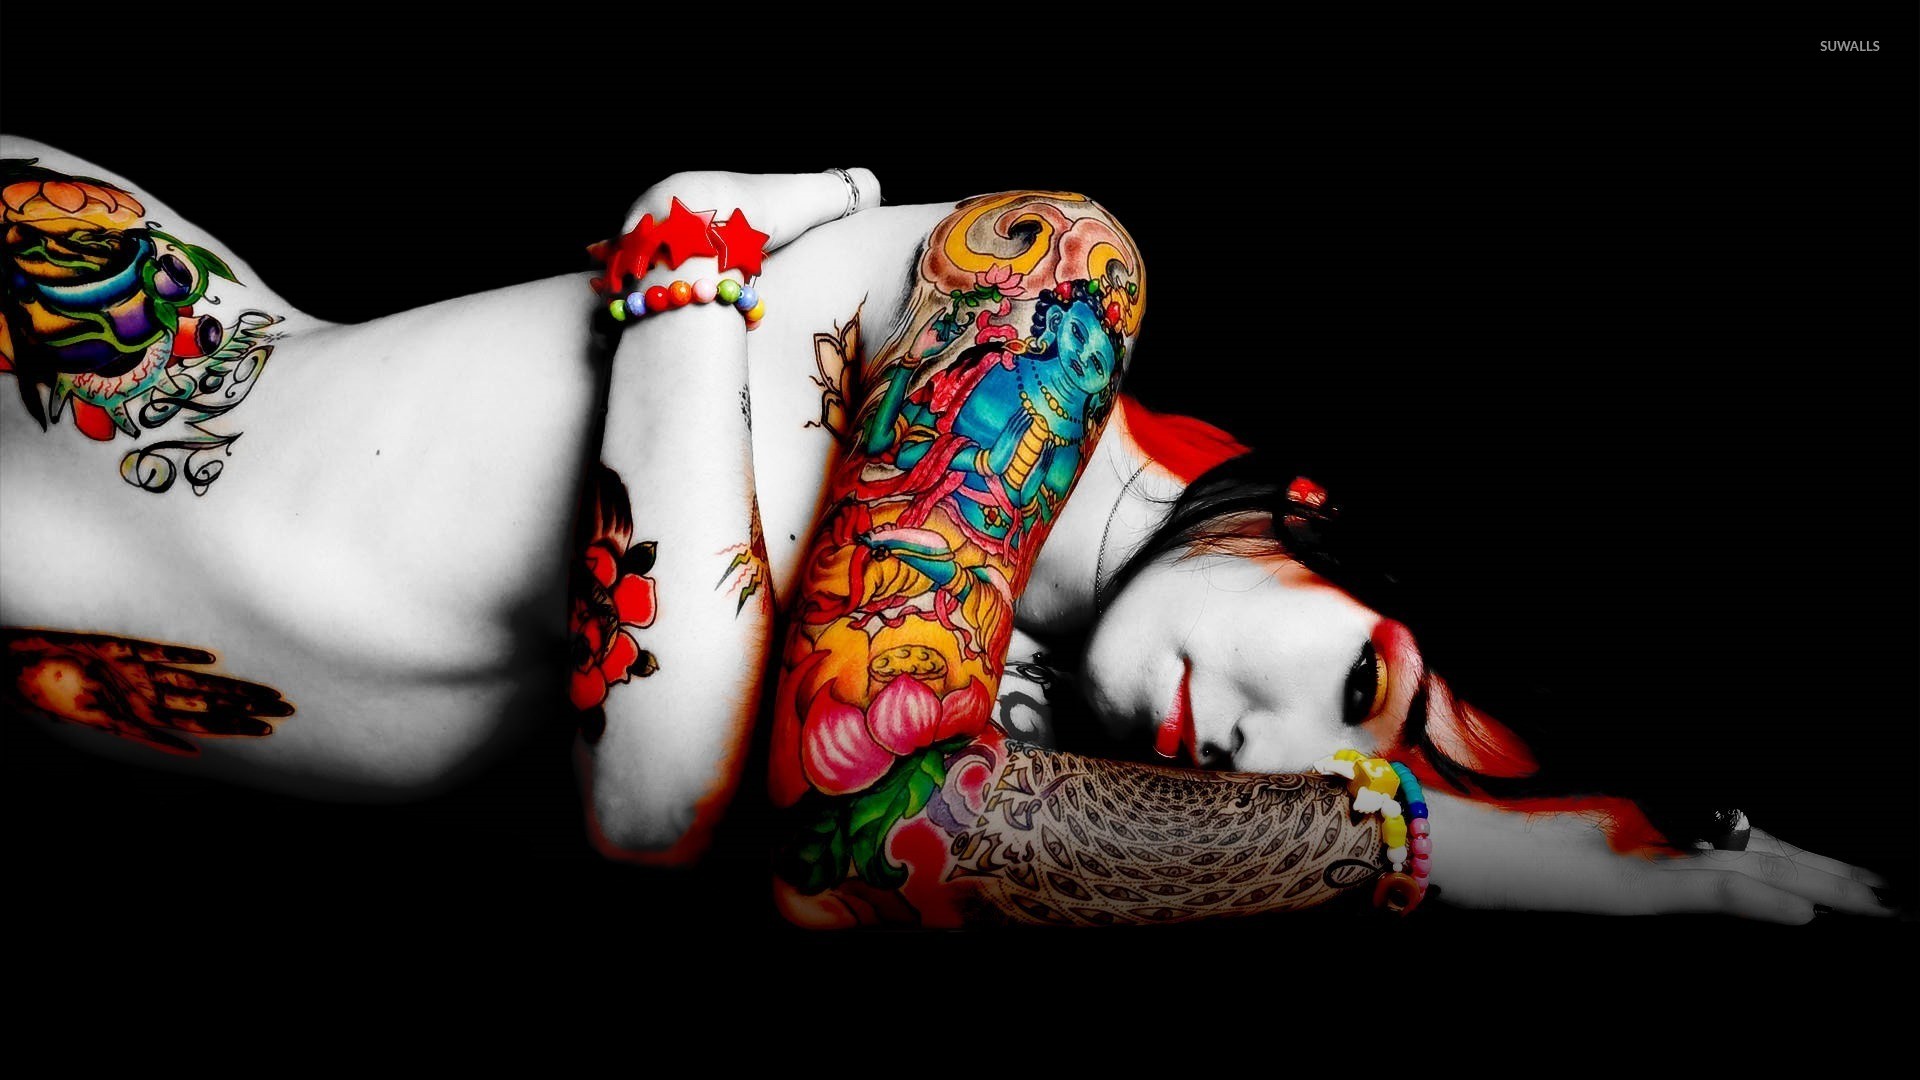 1920x1080 Woman with colorful tattoos wallpaper